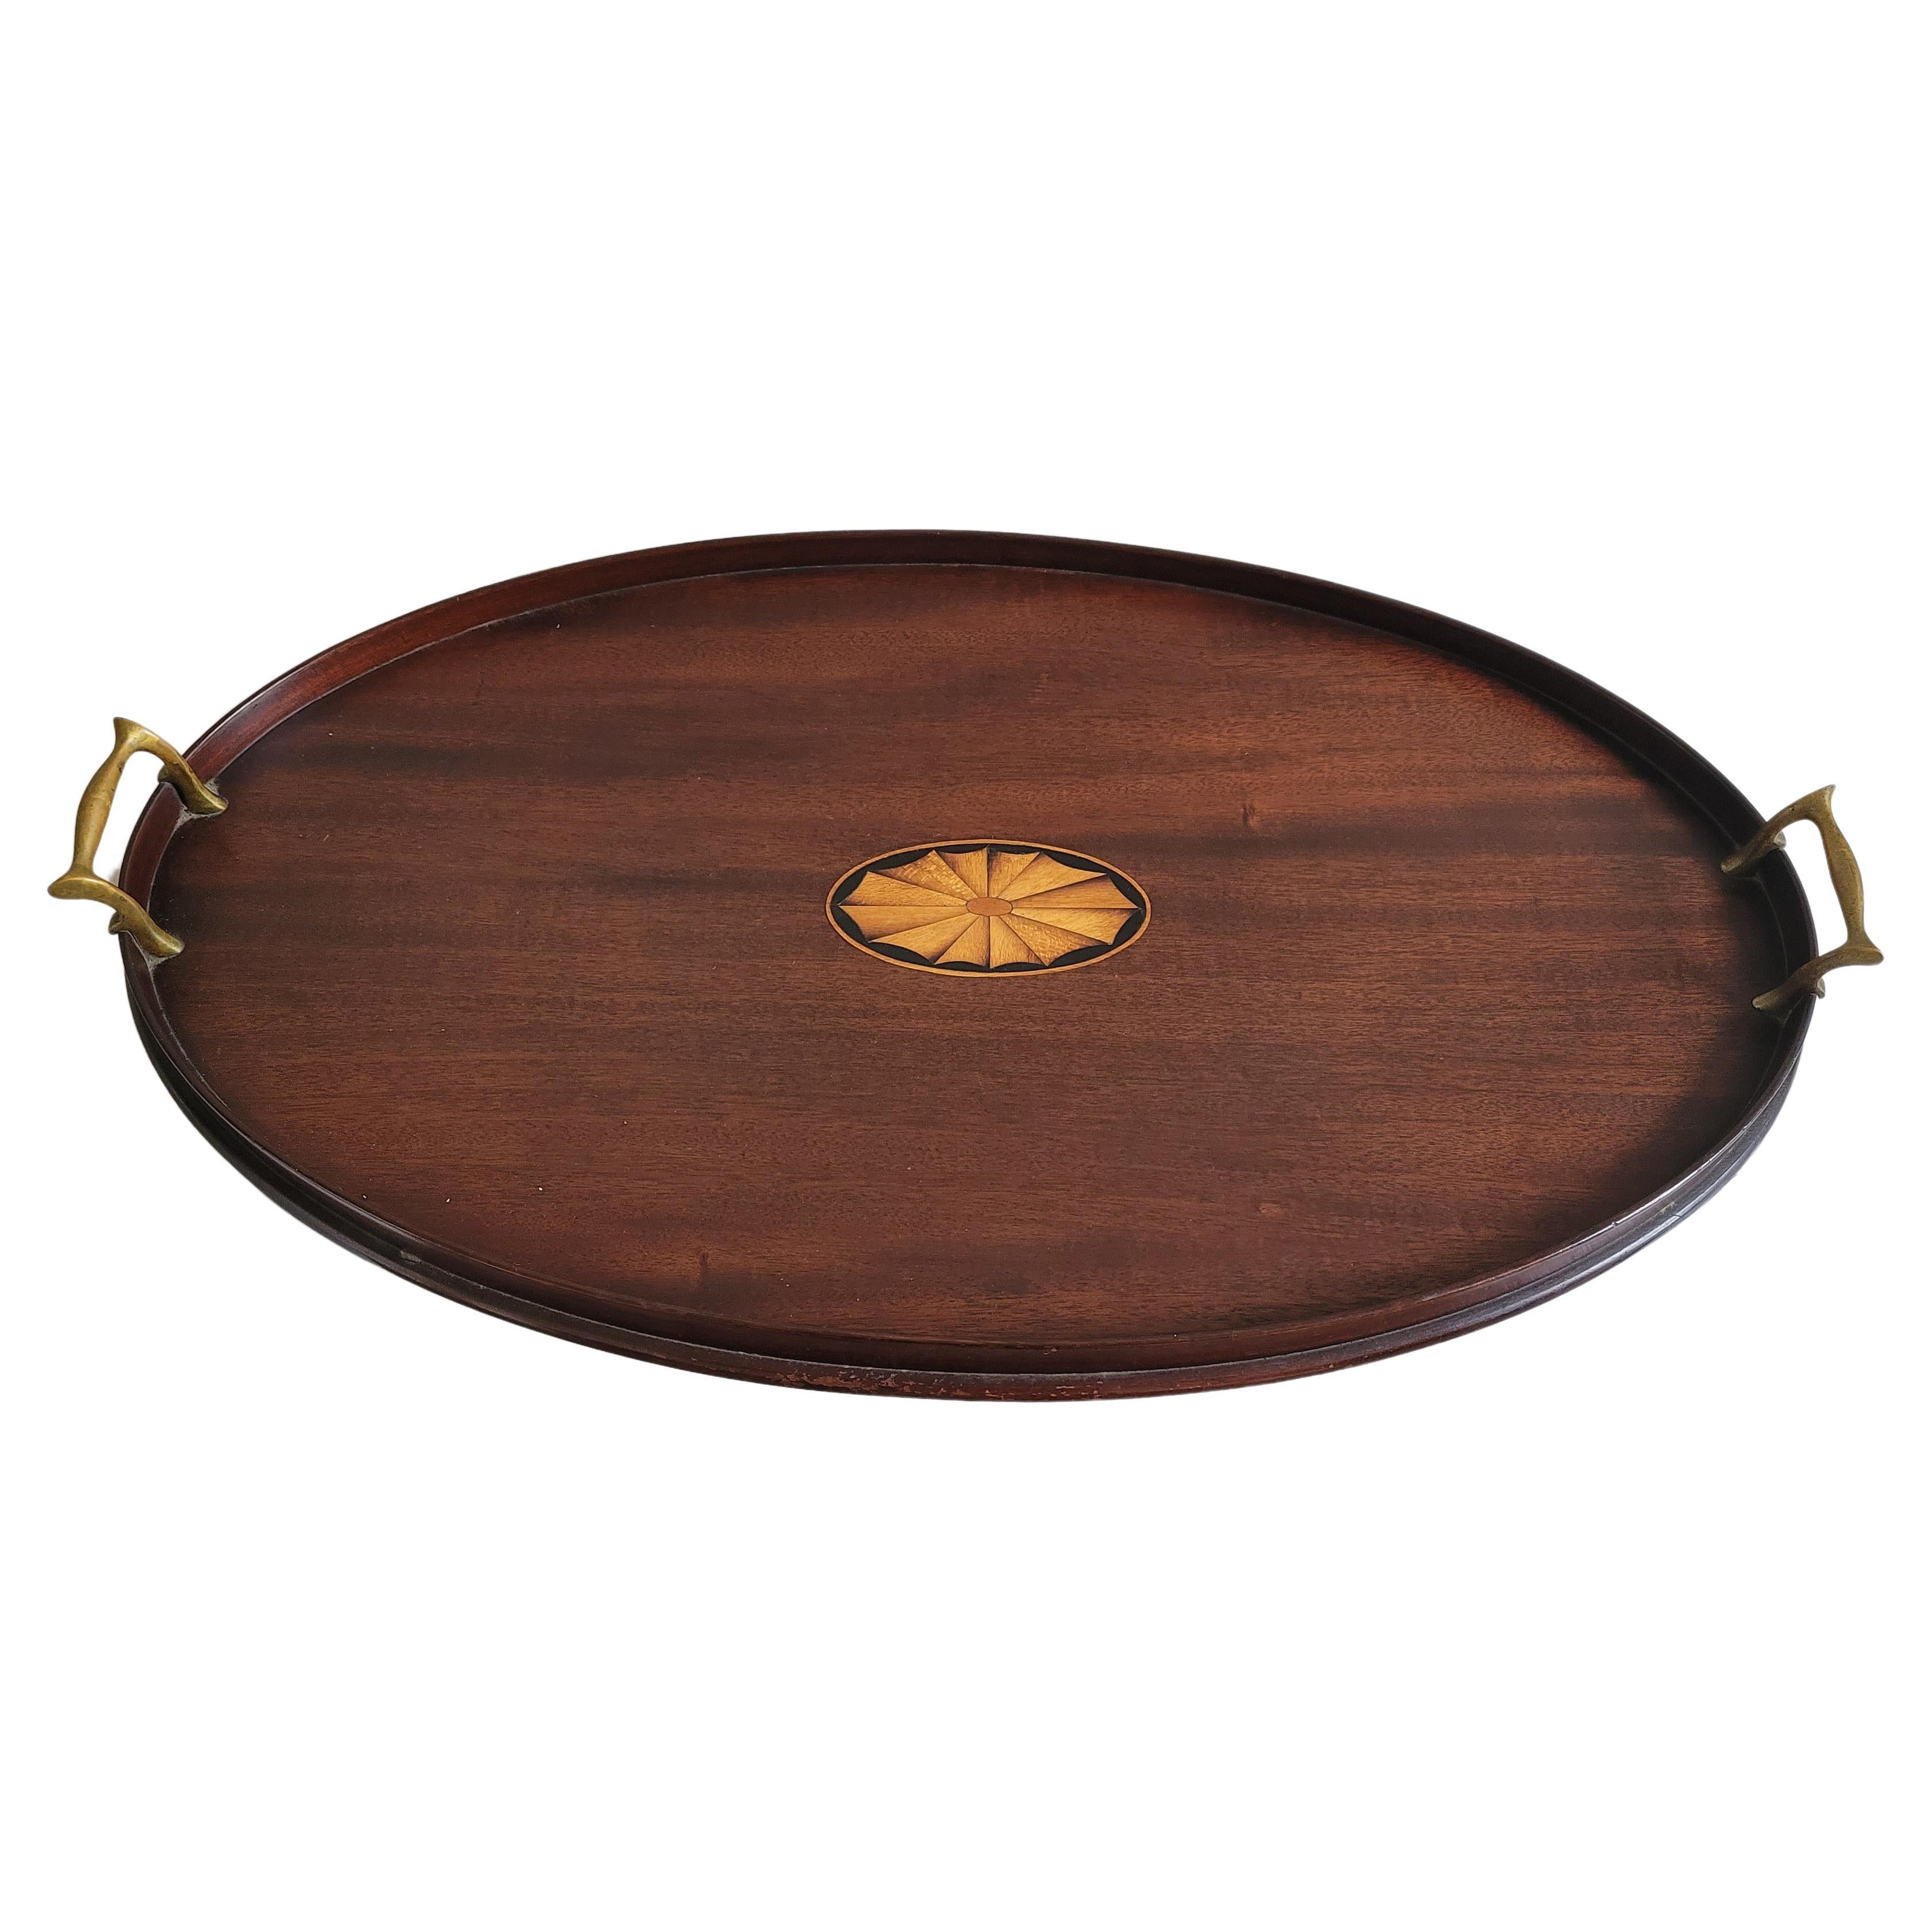 A Large Victorian period George III Style Inlaid Mahogany Two Handle Galleried Oval Tray. Solid brass handles.
Good antique condition with patina. Measures 24.5